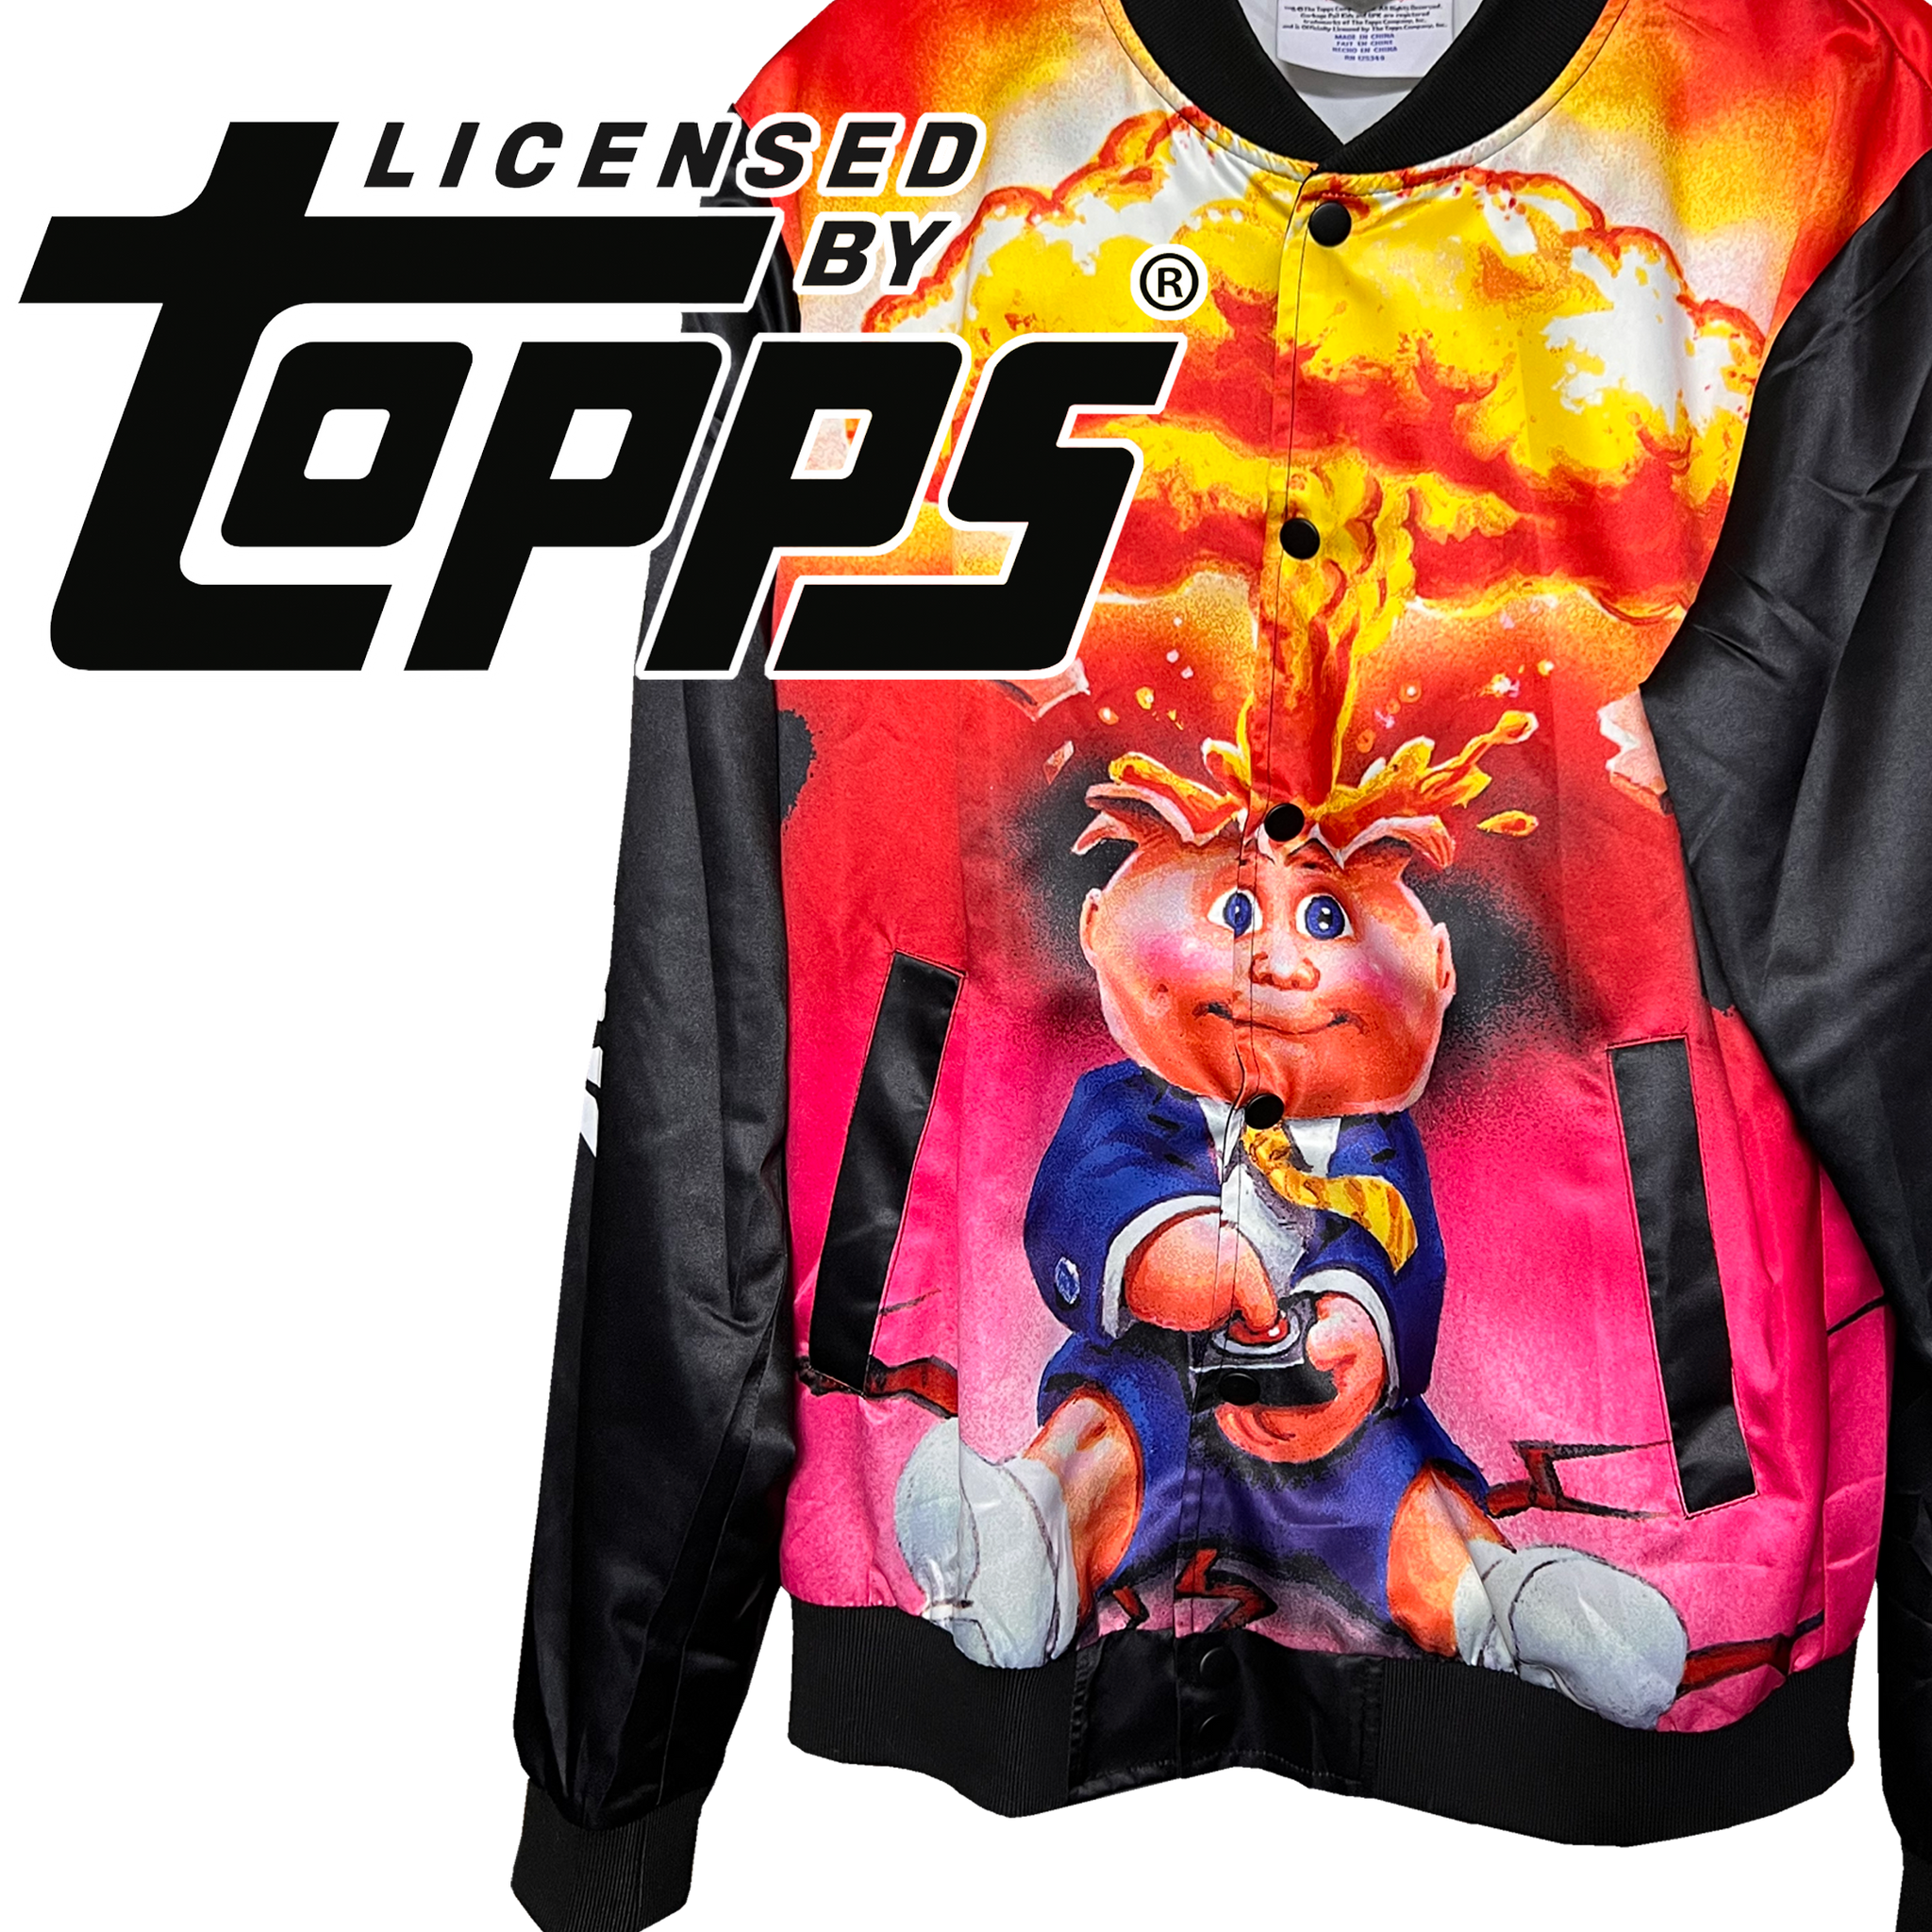 NWT size Small Officially Licensed Adam Bomb Satin Garbage Pail Kids jacket